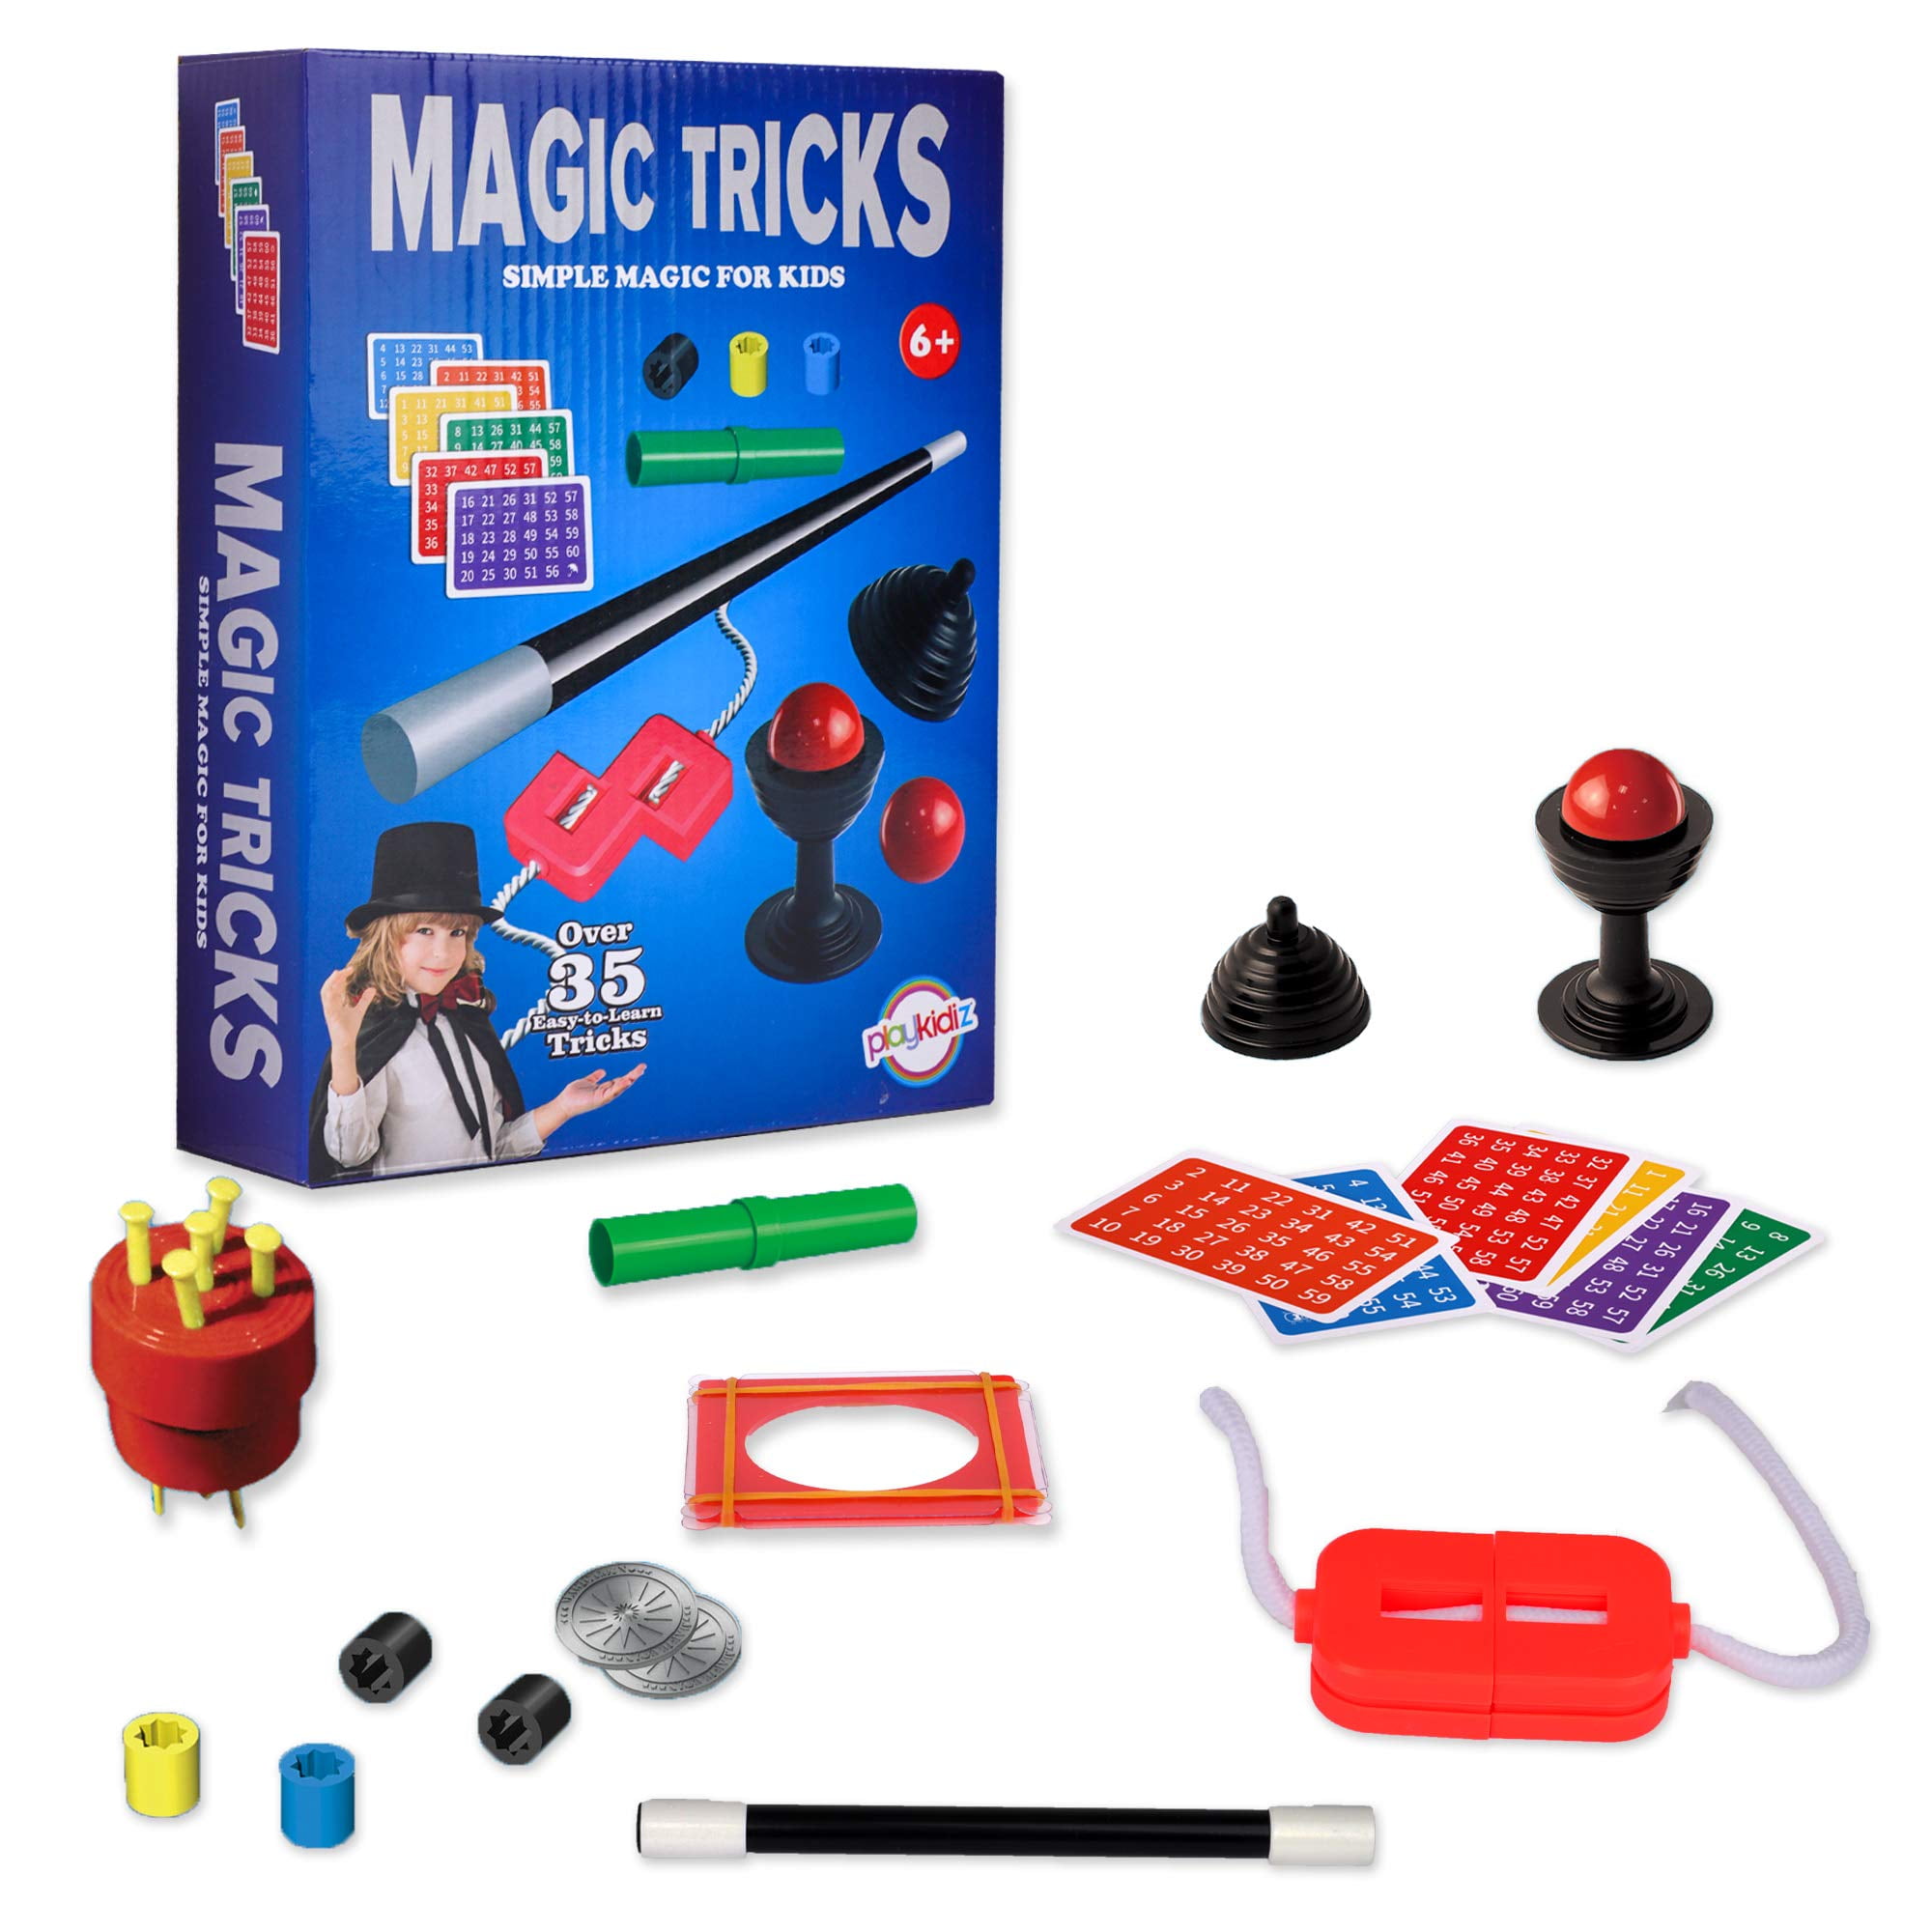 Clown color changing card stage magic tricks   for kids fun magic toys JR